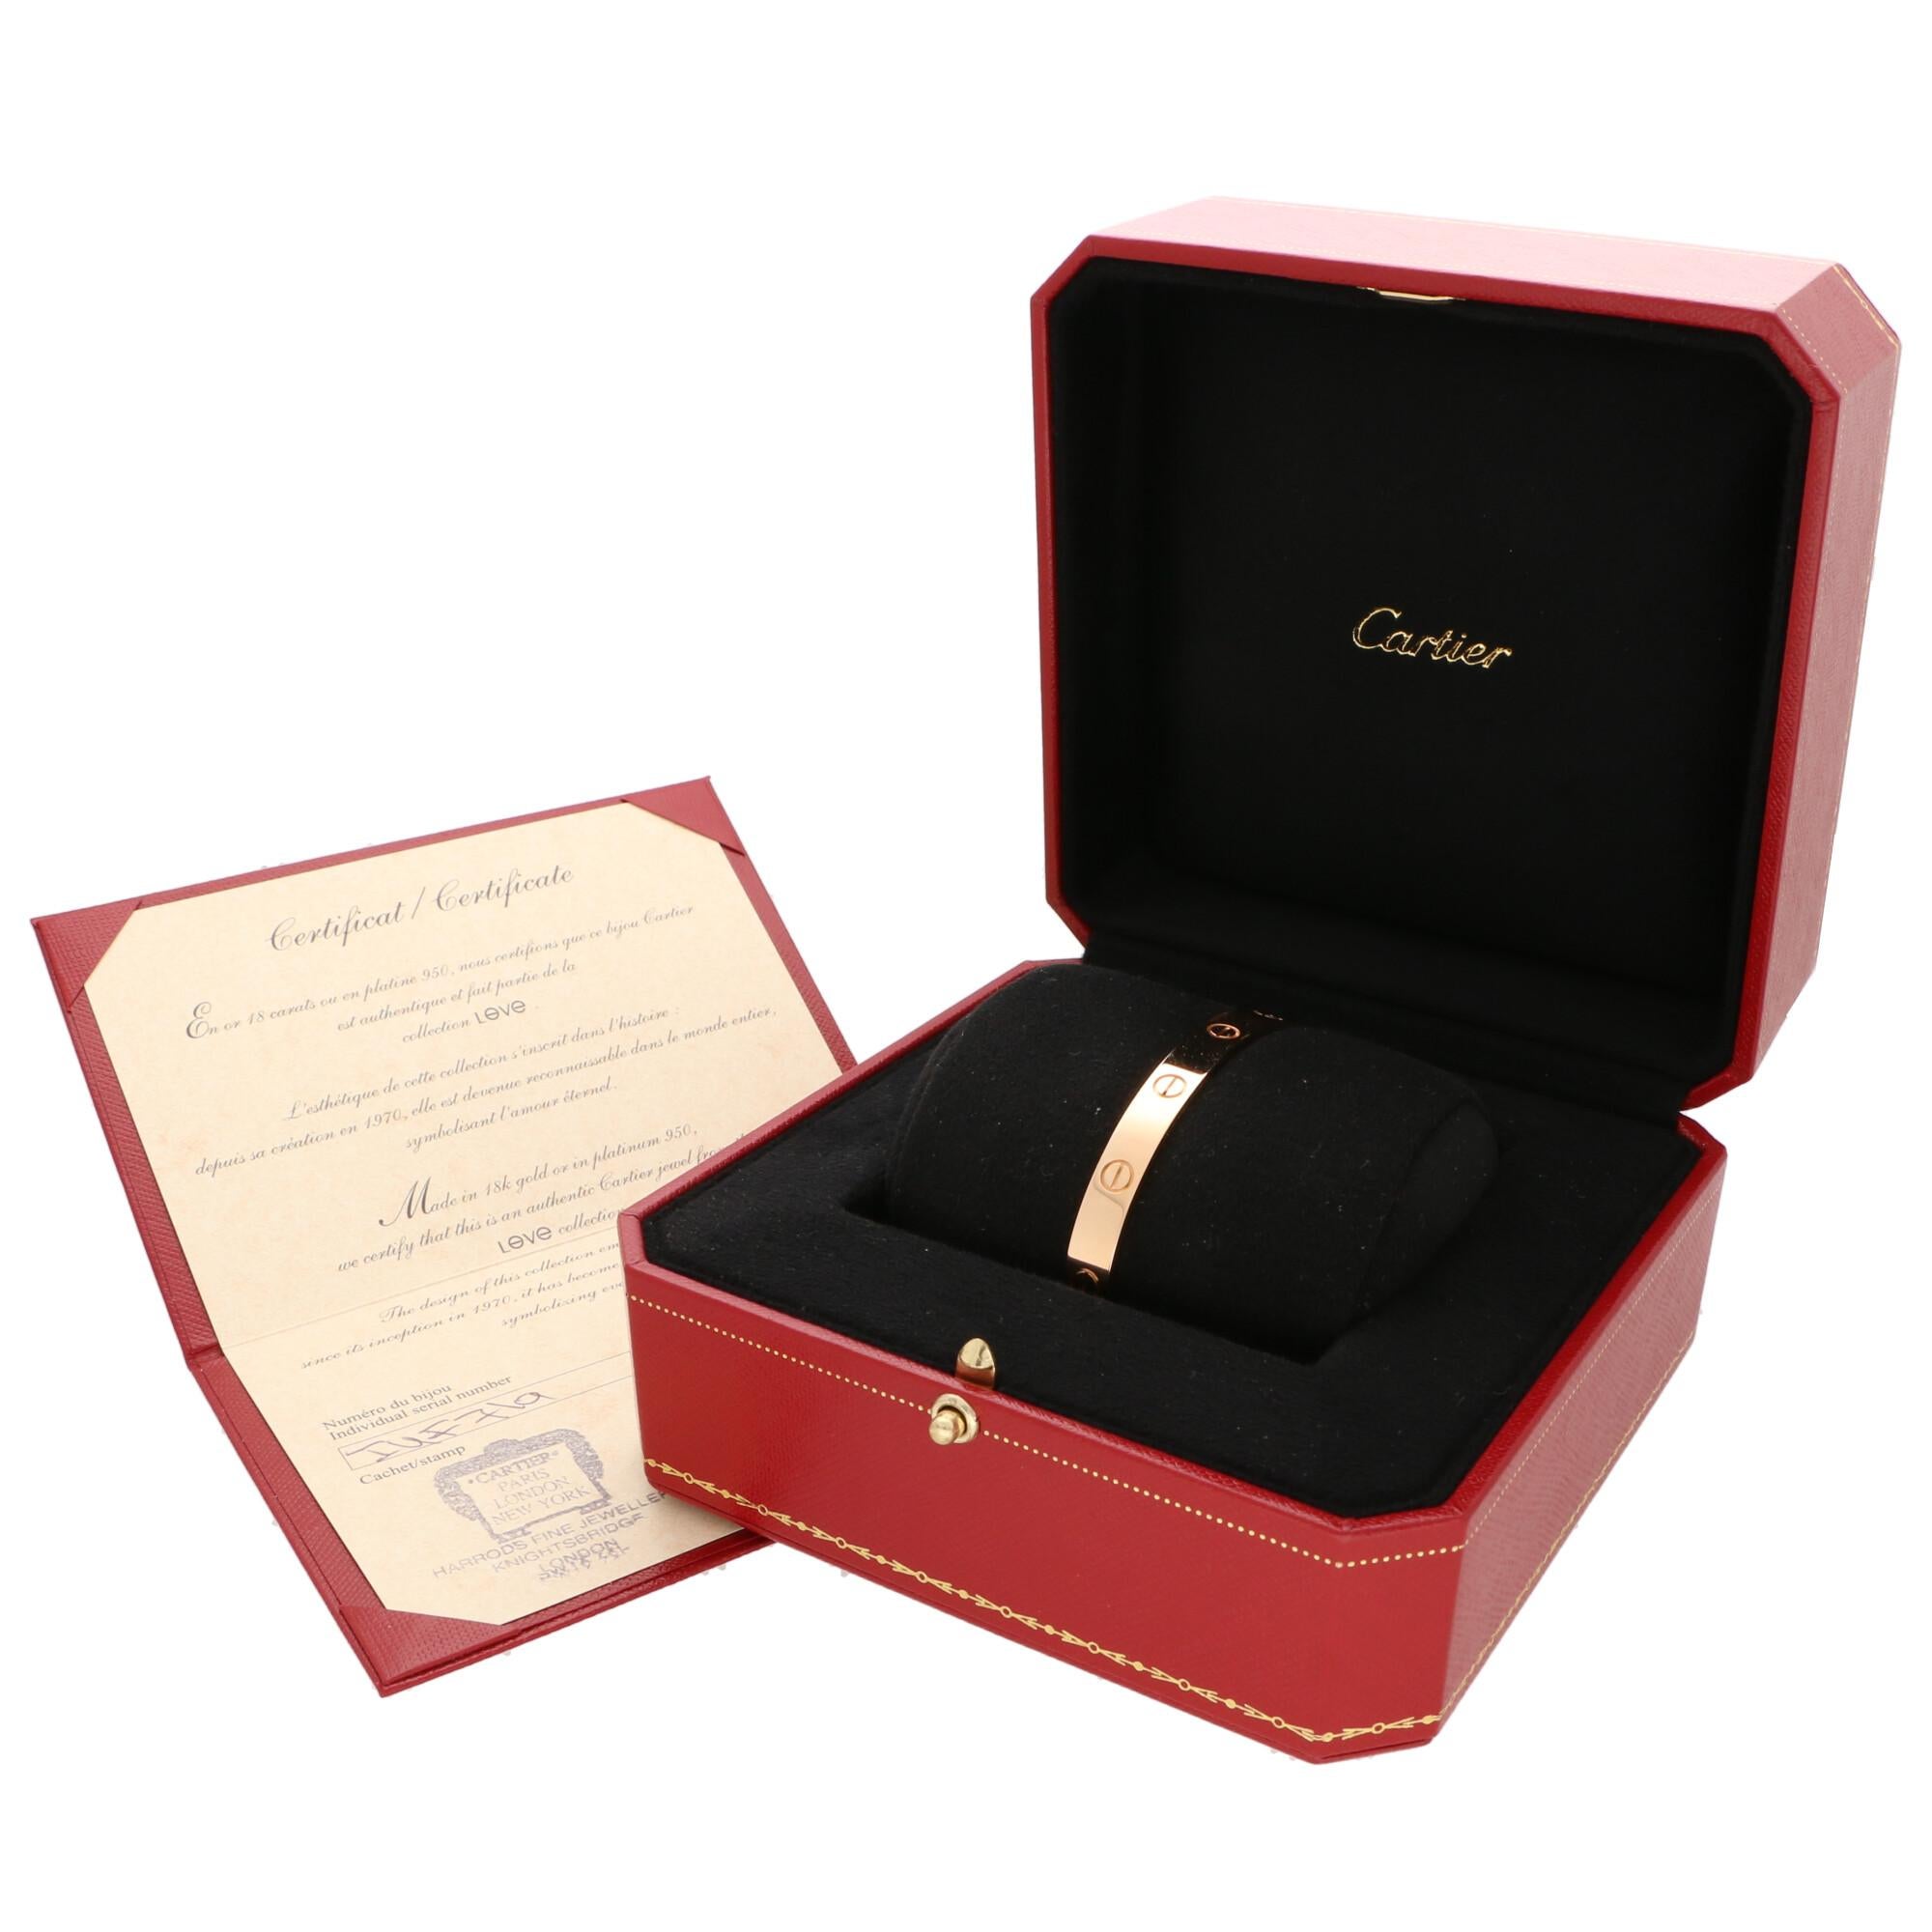 A classic Cartier Love U torque bangle set in 18k rose gold.

The Love collection is a firm favourite of many mainly due to the simple, beautiful and elegant design. The bangle is composed of a 6.2-millimetre band with nine individual nail motifs